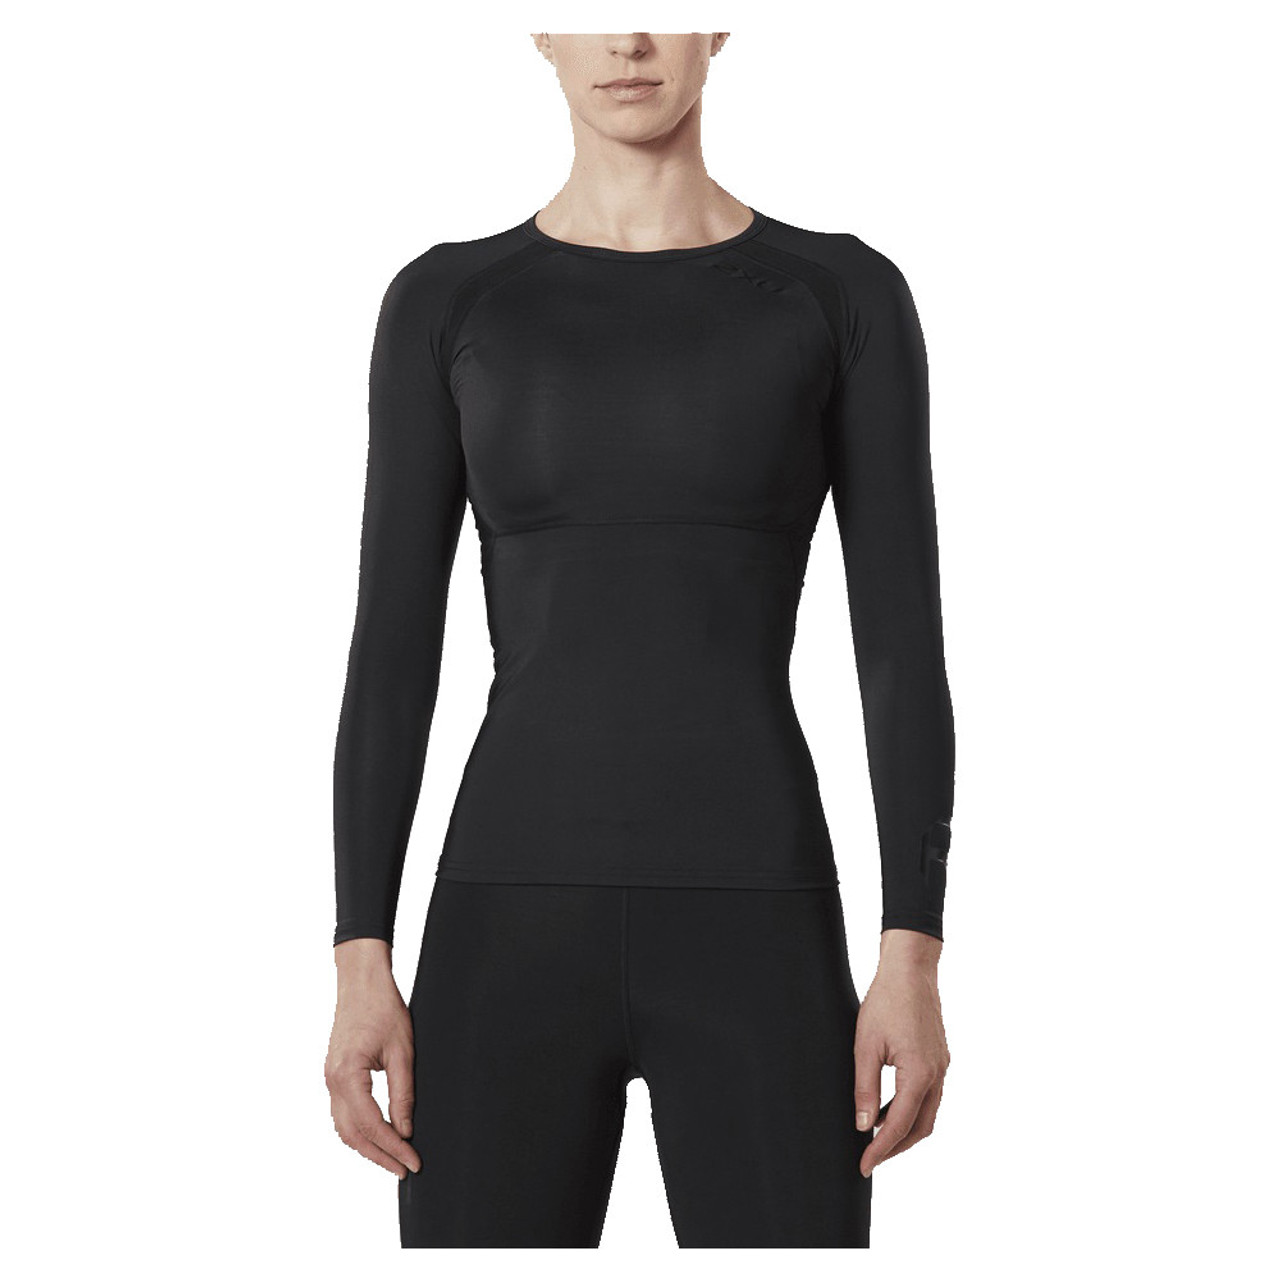 2XU Women's Refresh Recovery Long Sleeve Compression Top